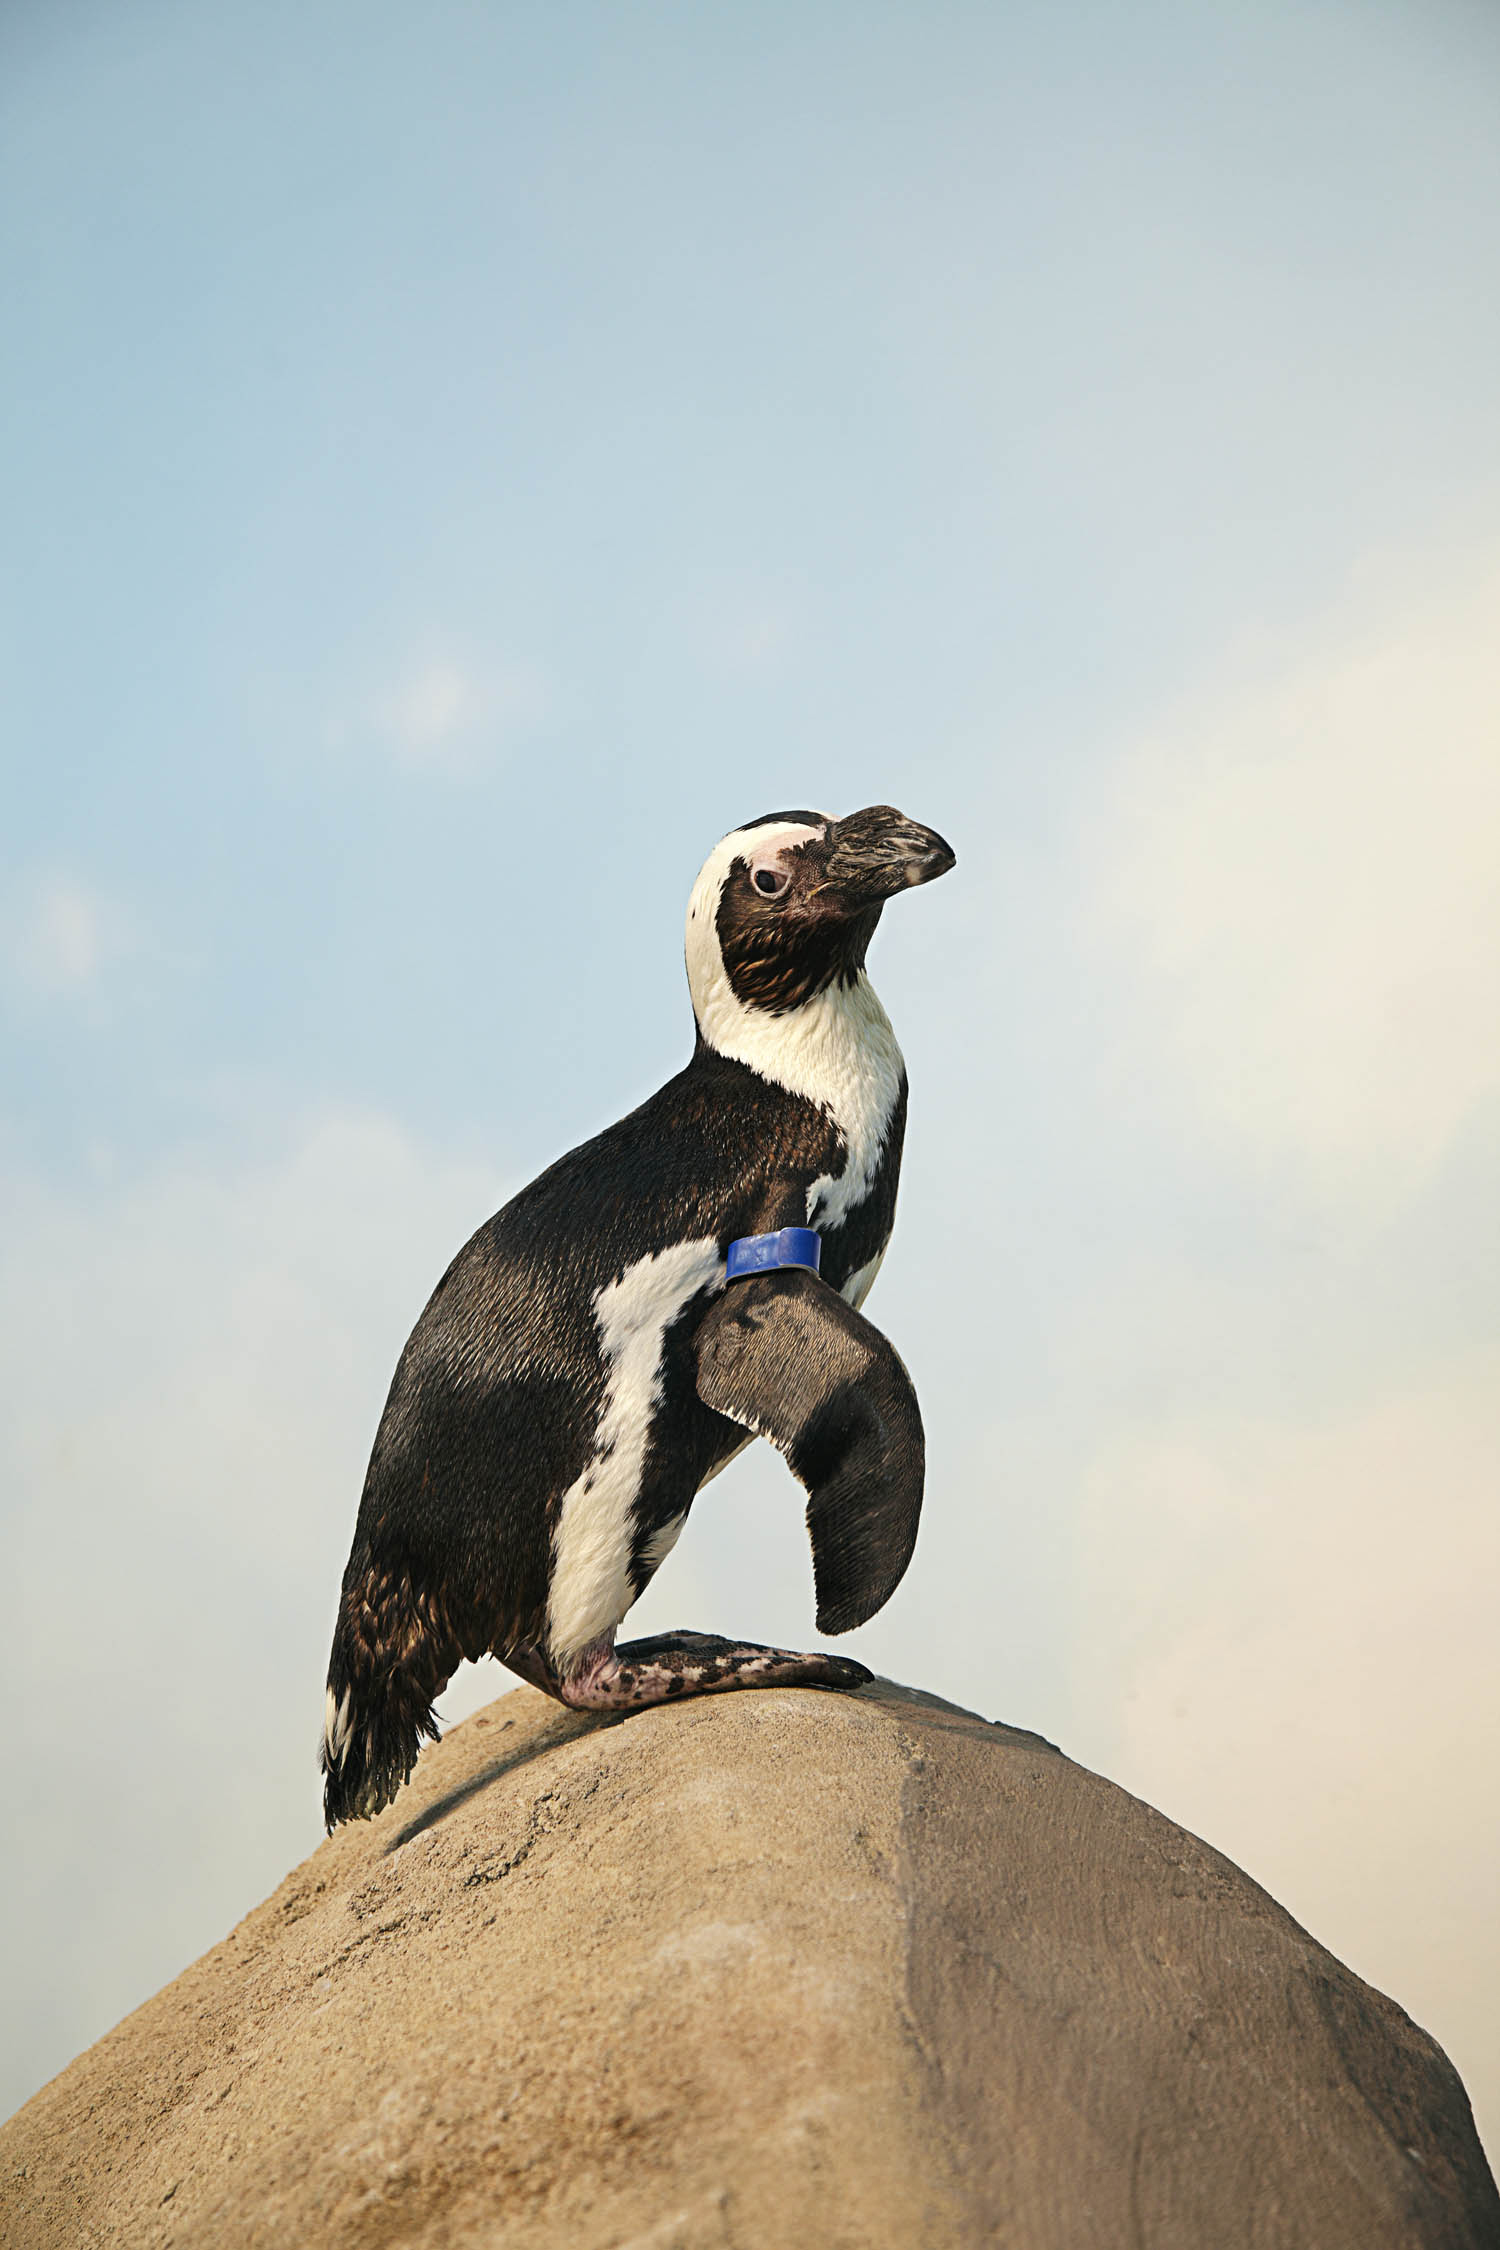 Pierre, the 29-year-old African penguin